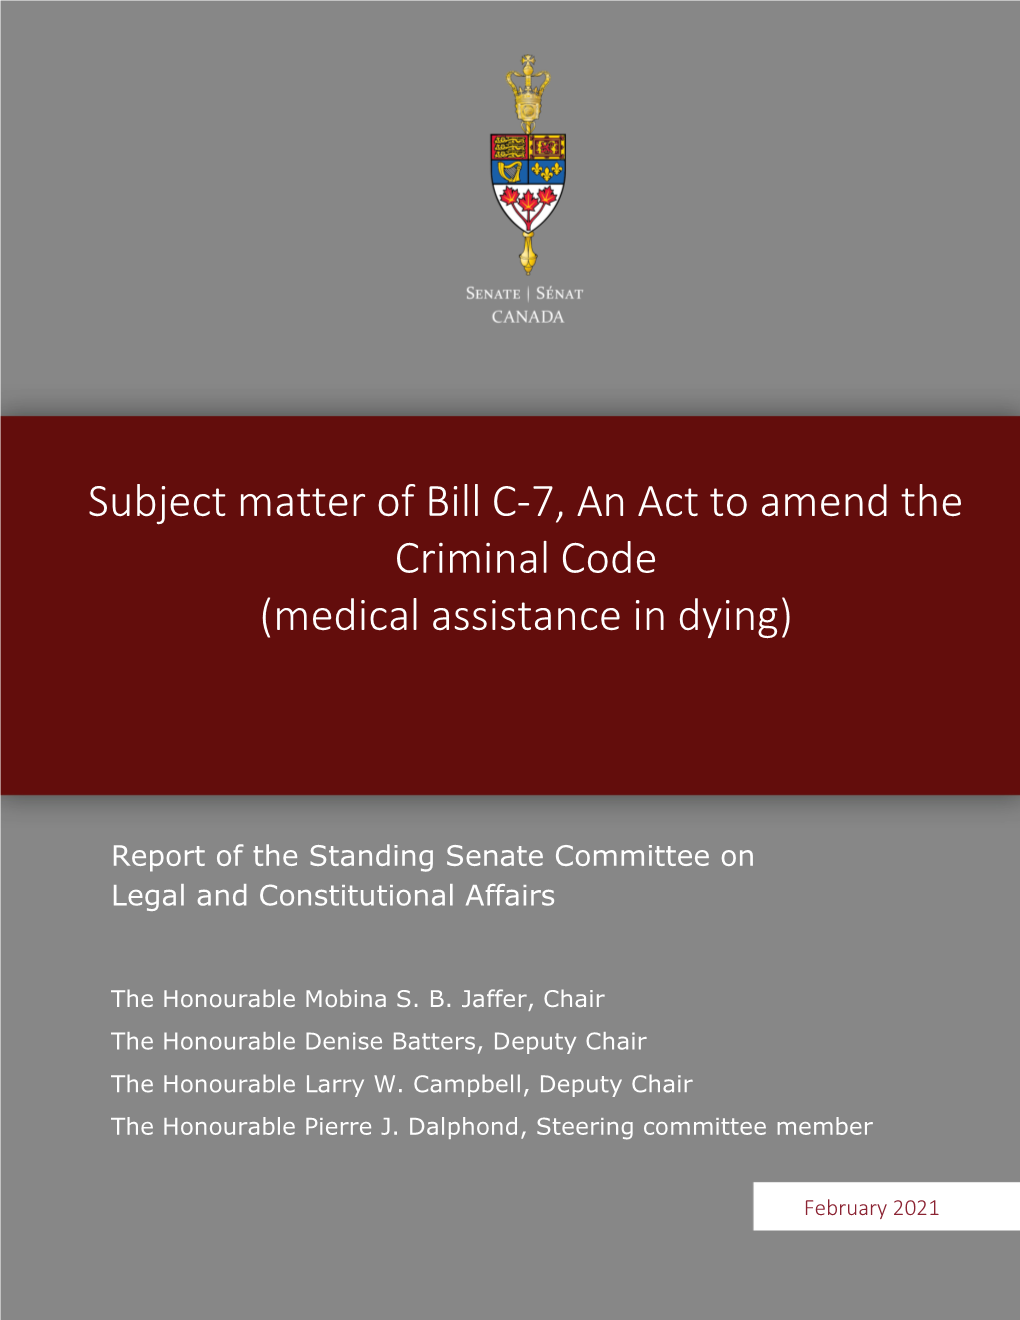 Subject Matter of Bill C-7, an Act to Amend the Criminal Code (Medical Assistance in Dying)